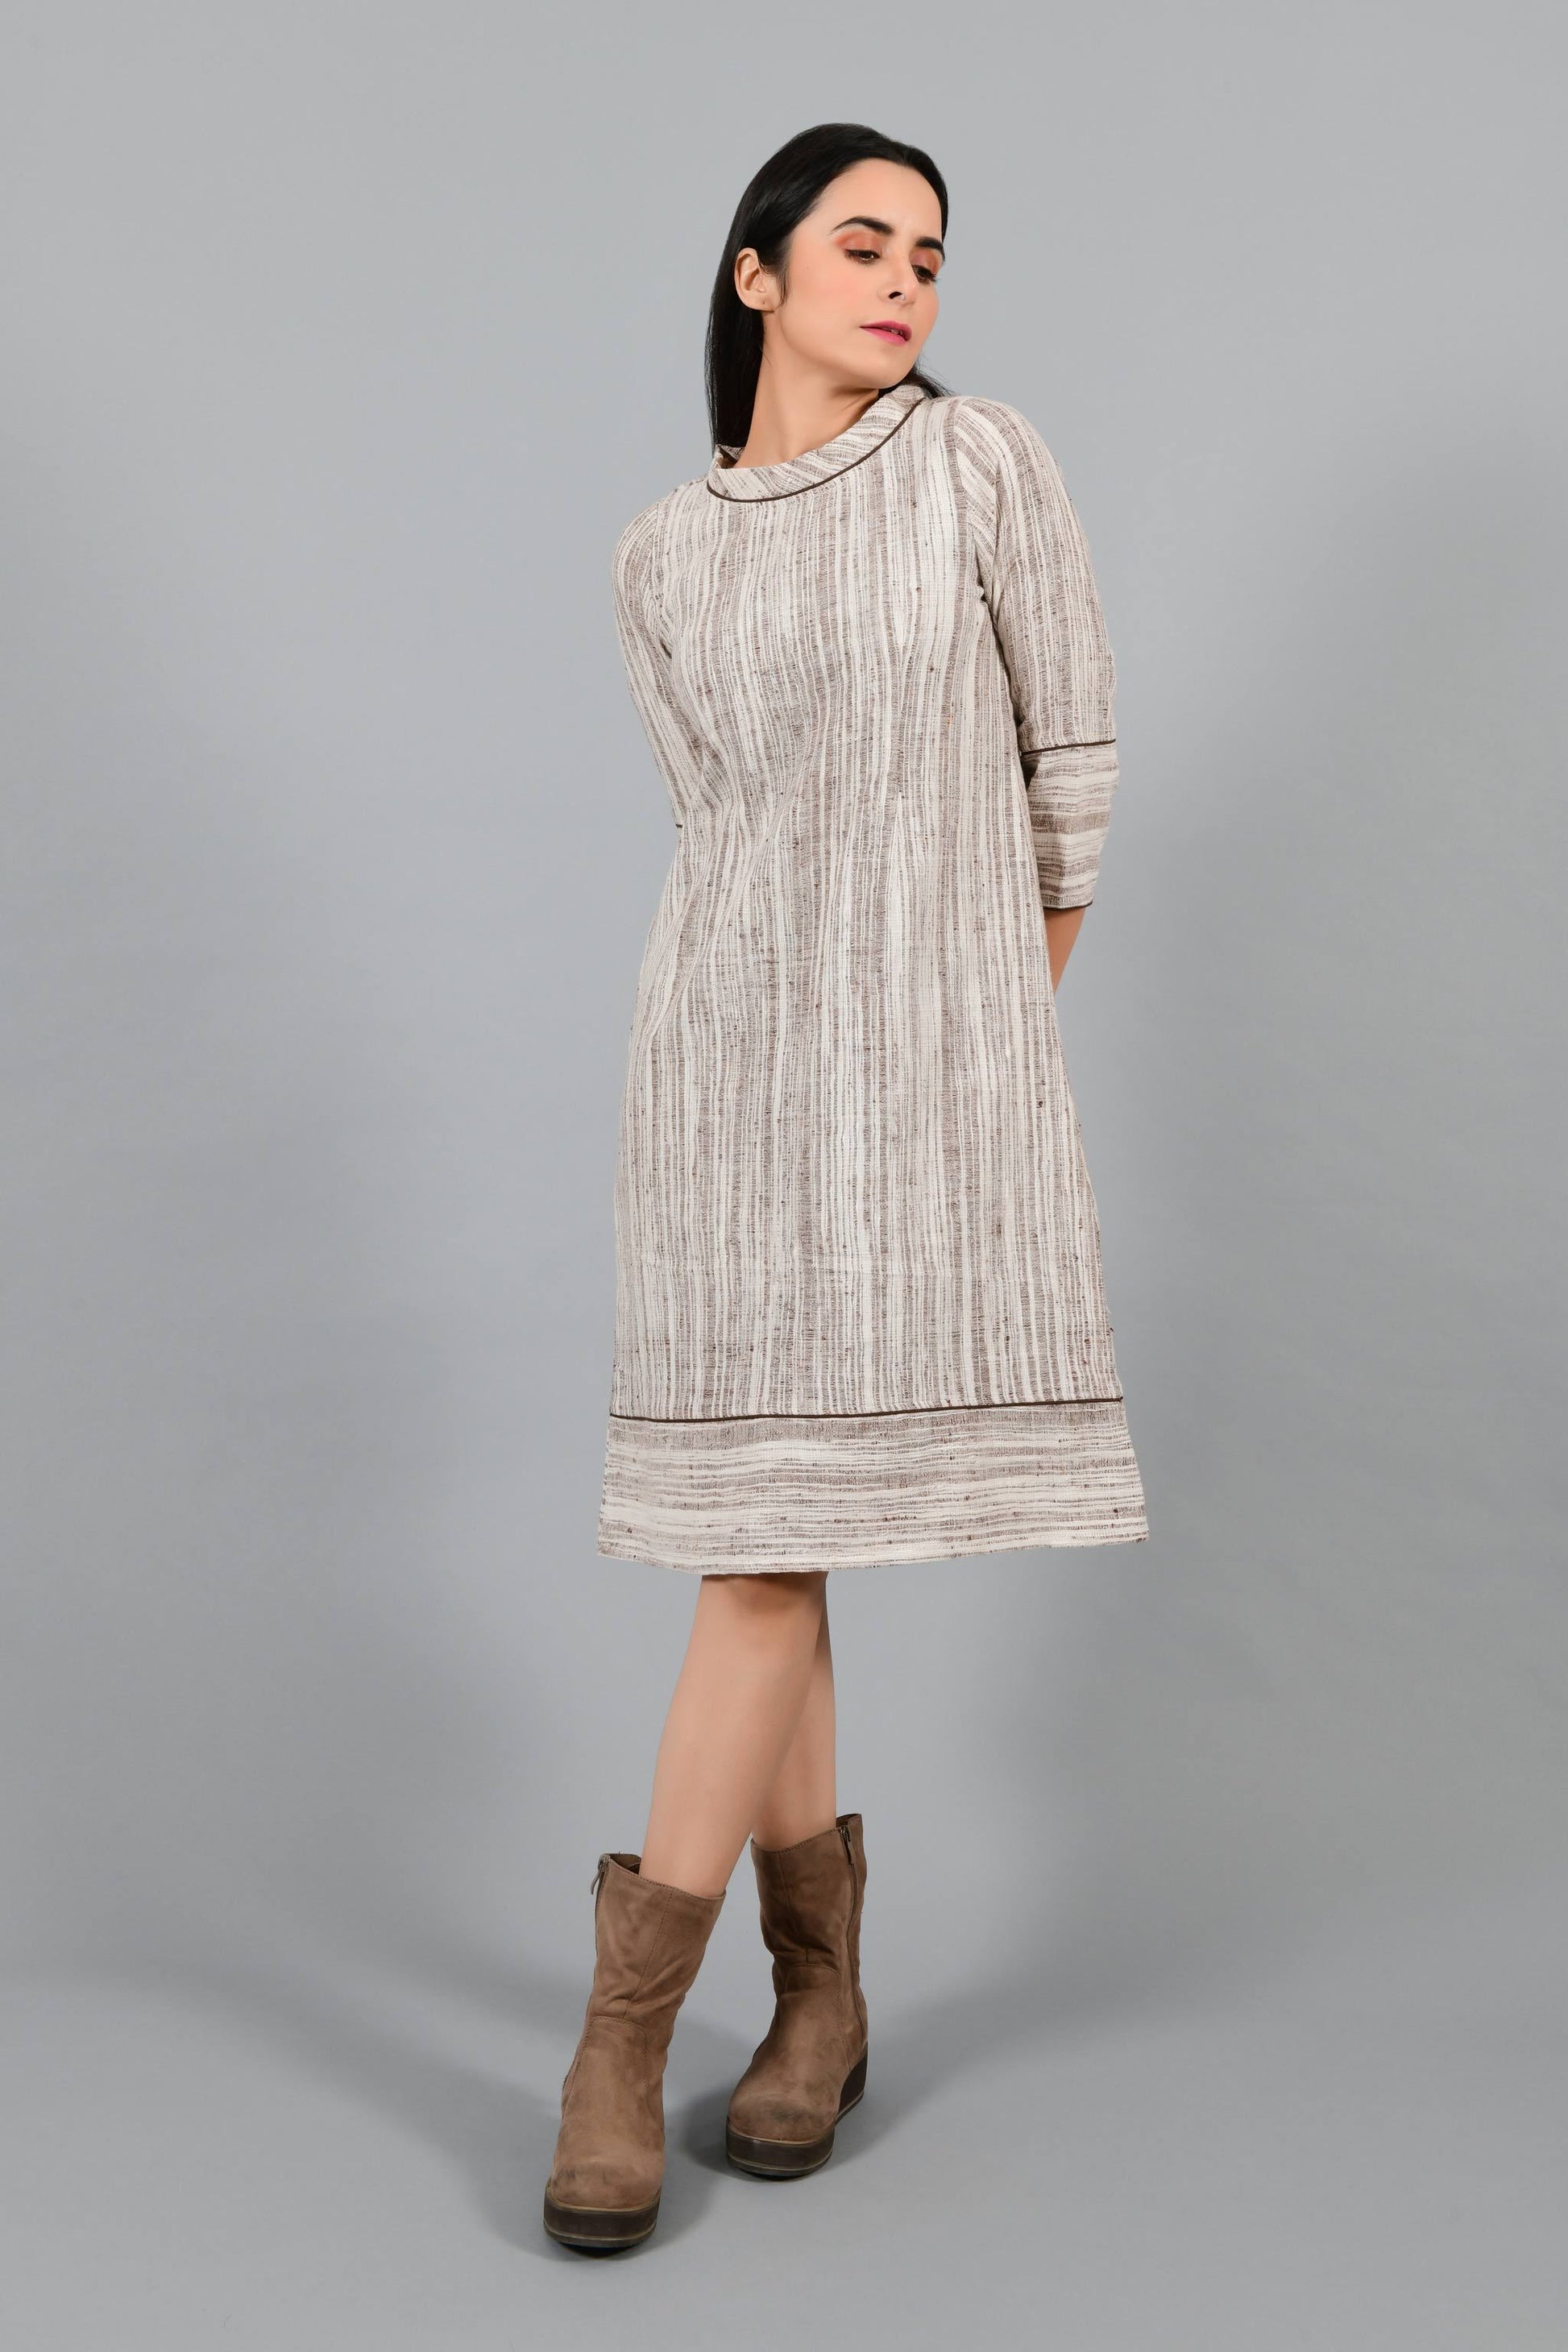 Front pose of an Indian Womenswear female model wearing brown handspun and handwoven cotton a-line dress by Cotton Rack.